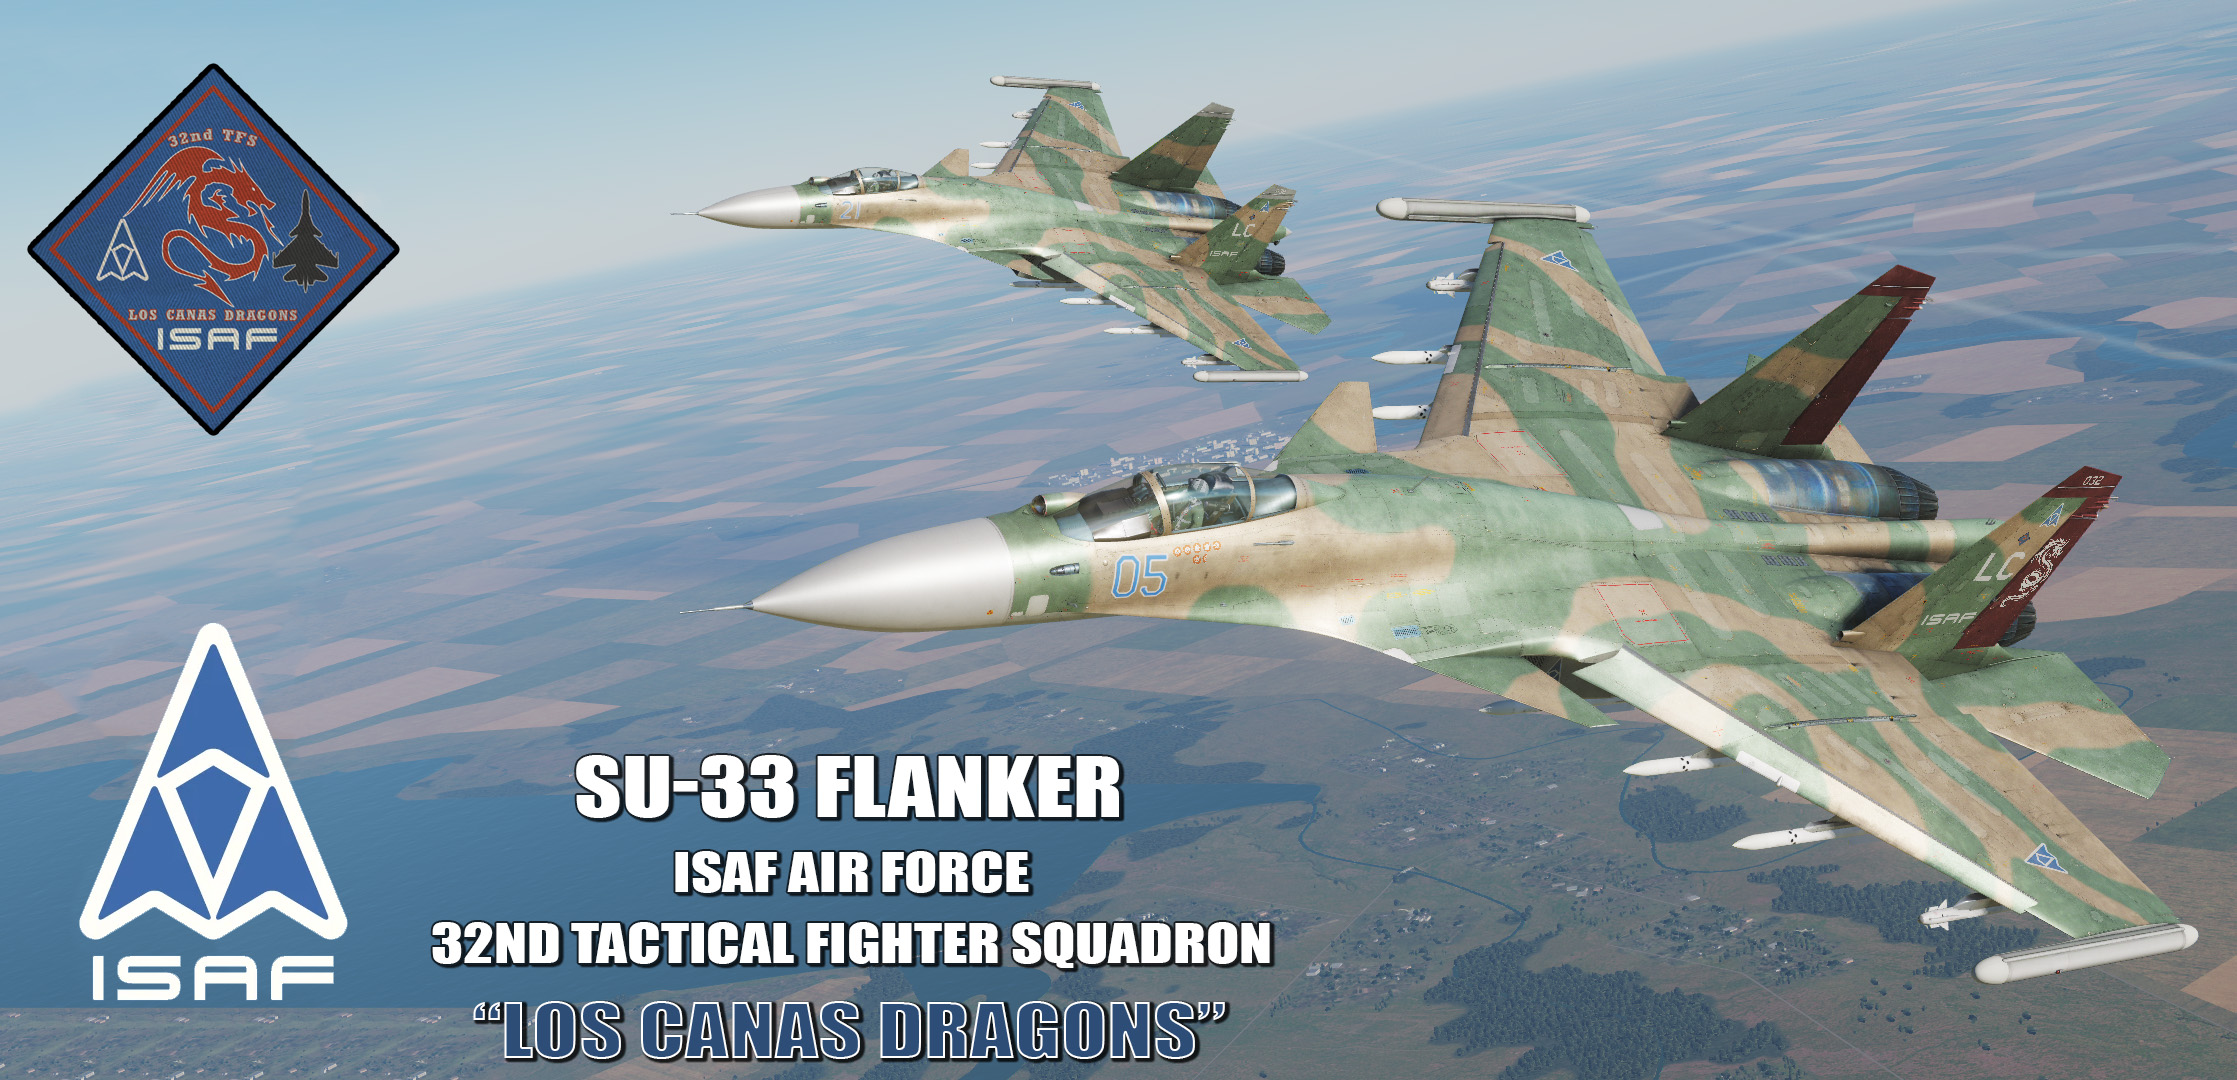 Ace Combat - ISAF Air Force 32nd Tactical Fighter Squadron "Los Canas Dragons" SU-33 Flanker